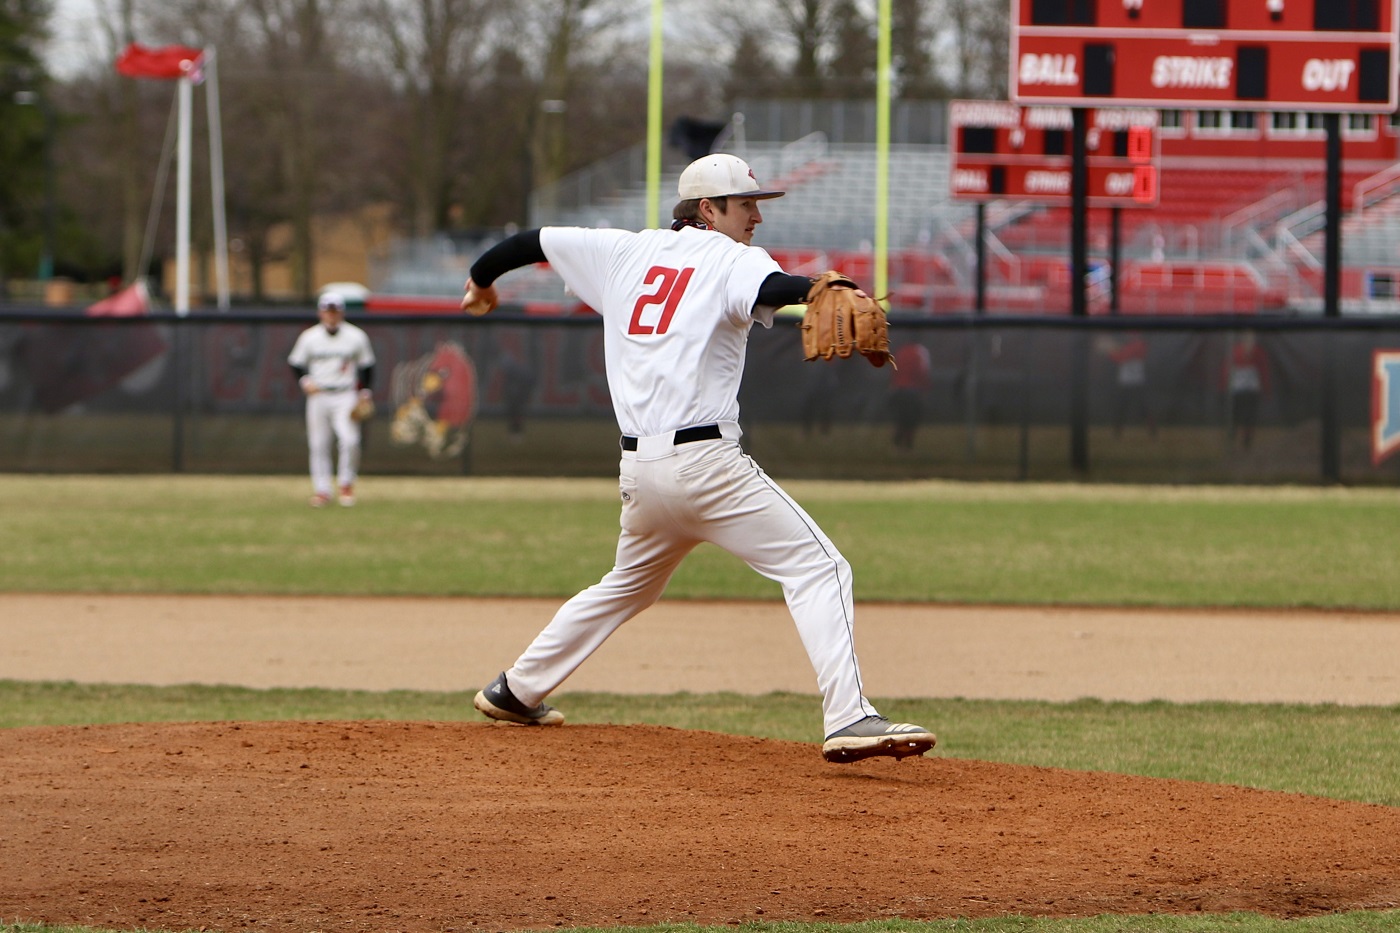 Grant Steinborn earned his 21st career win for the Cardinals on Friday vs. Saint Xavier